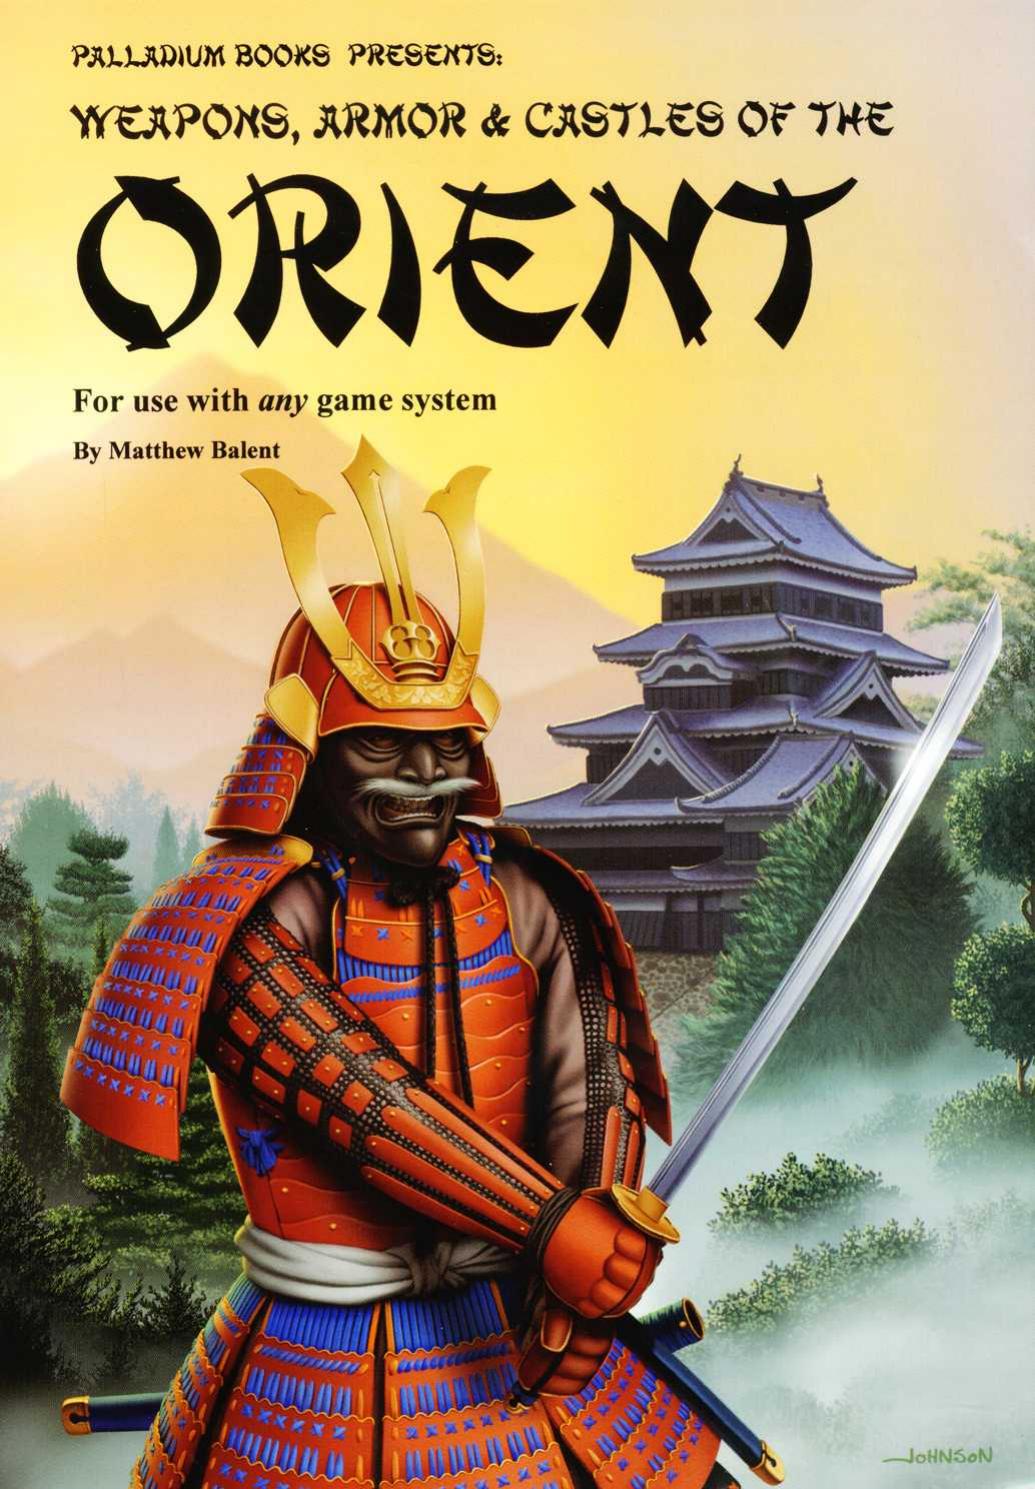 Weapons, Armor & Castles Of The Orient